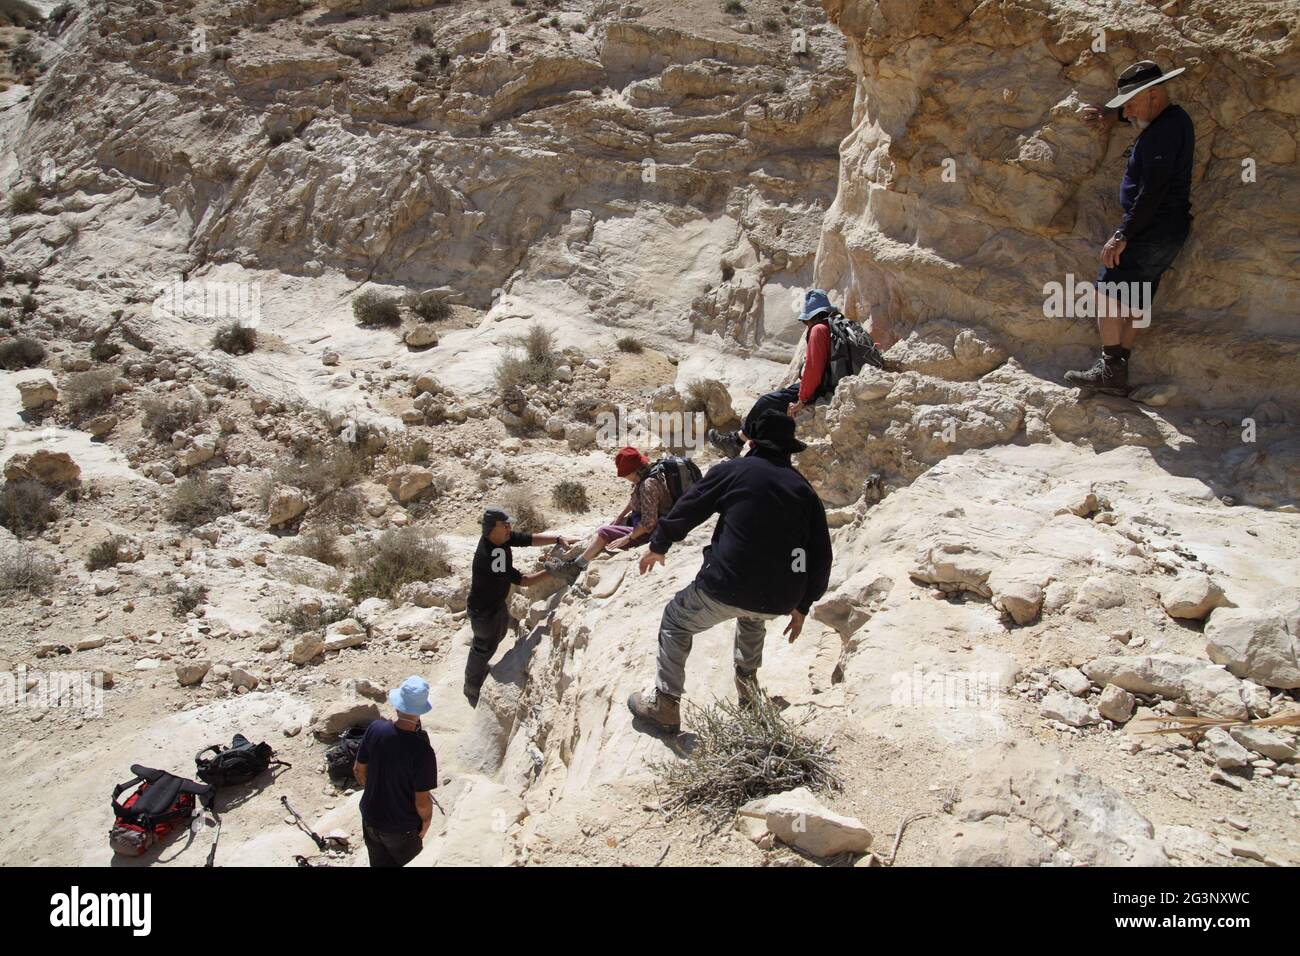 Hikers, senior adults in their 50s, 60s and 70s walk & slide down a high steep and dangerous rock to a ravine, one man helps the others, Negev Desert. Stock Photo